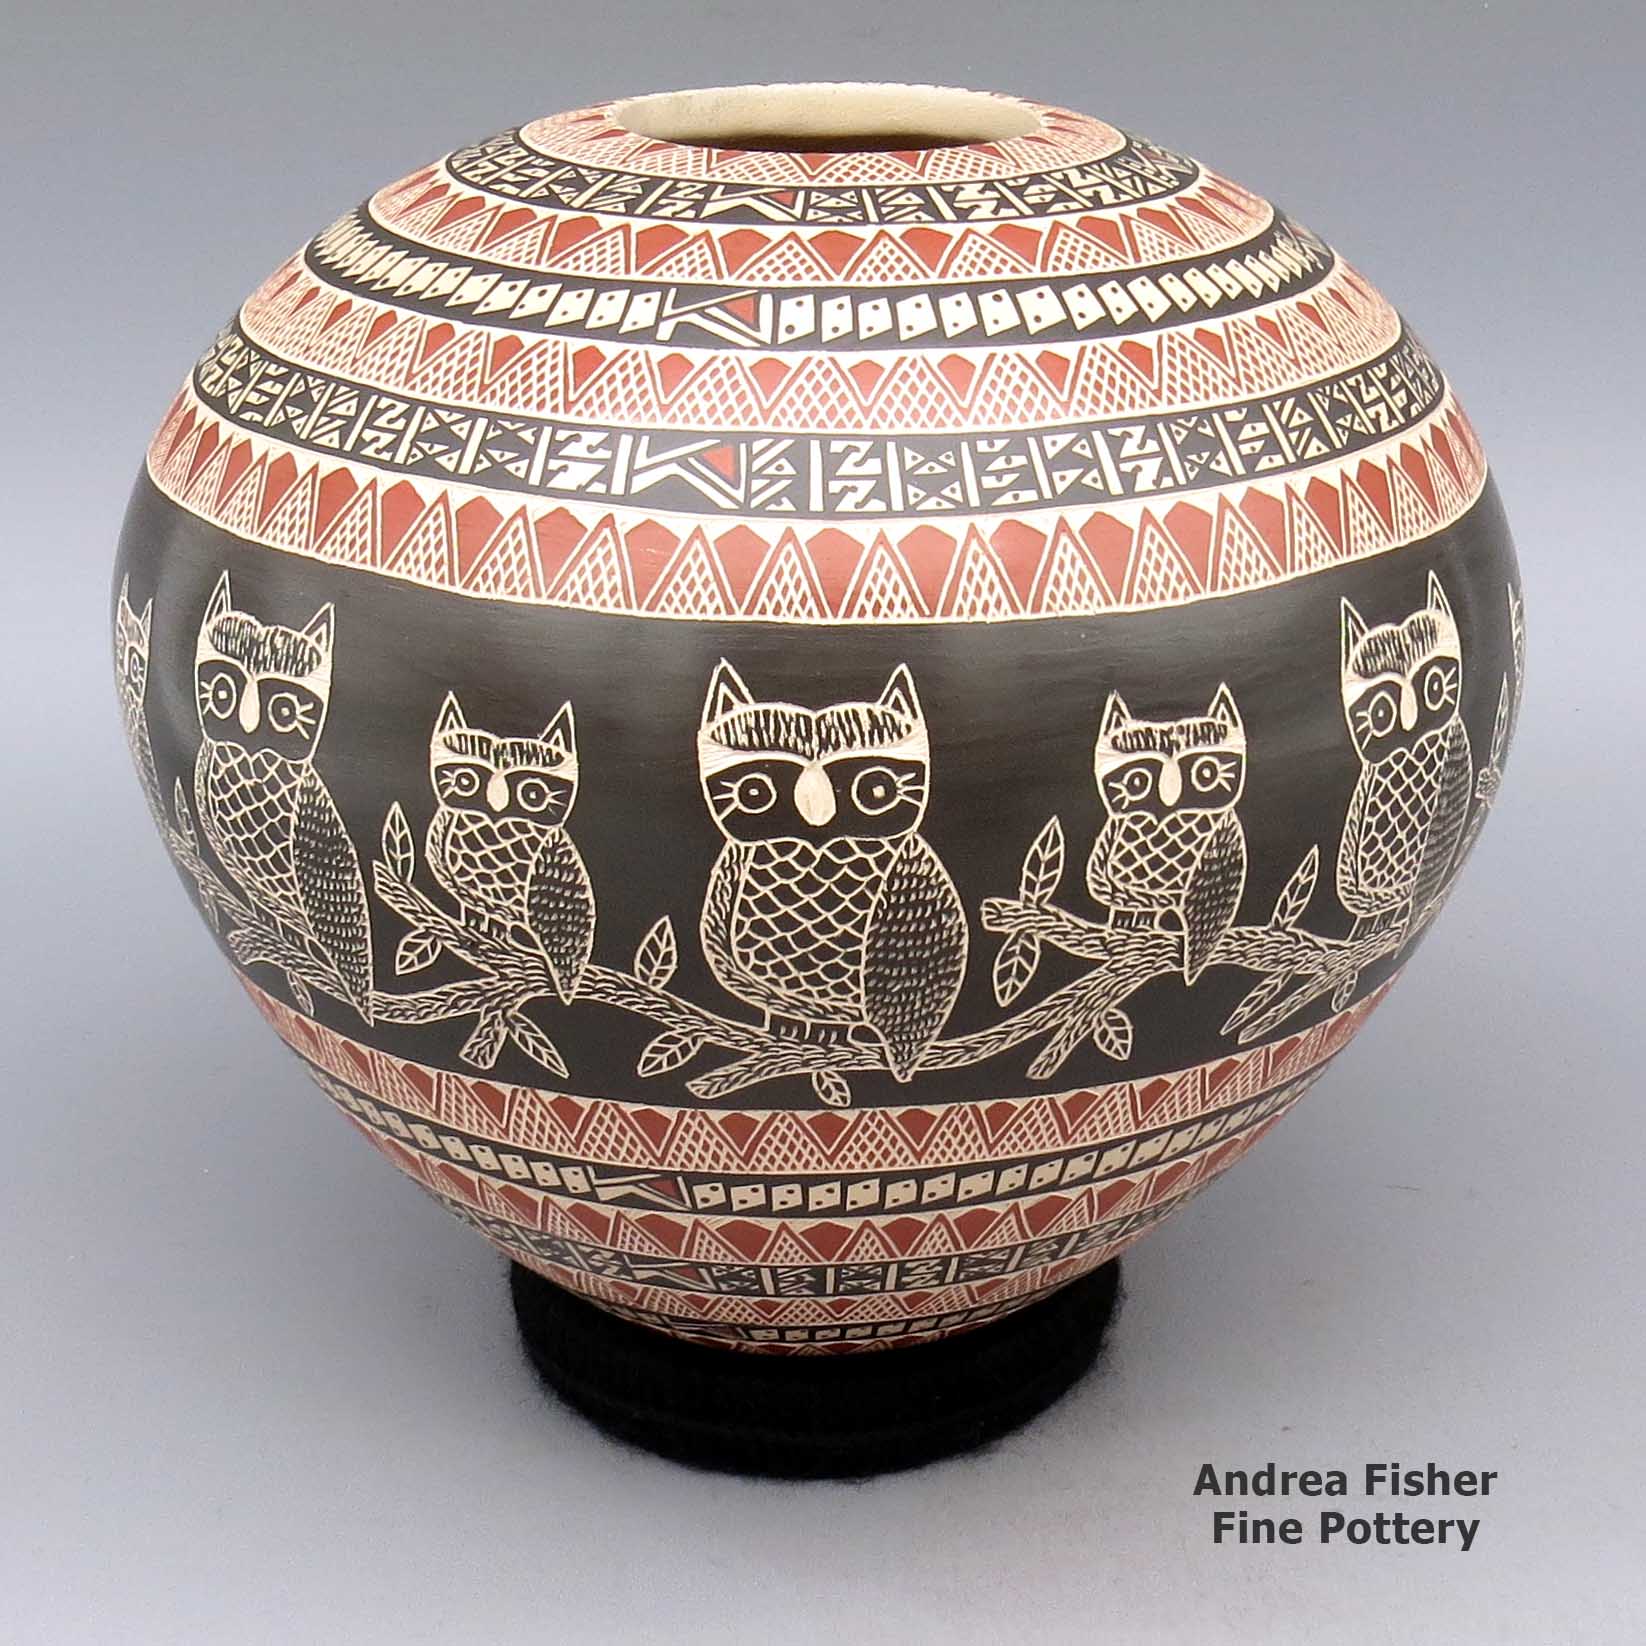 Polychrome jar with sgraffito and painted owl, branch, and geometric design made by Angela Corona of Mata Ortiz and Casas Grandes